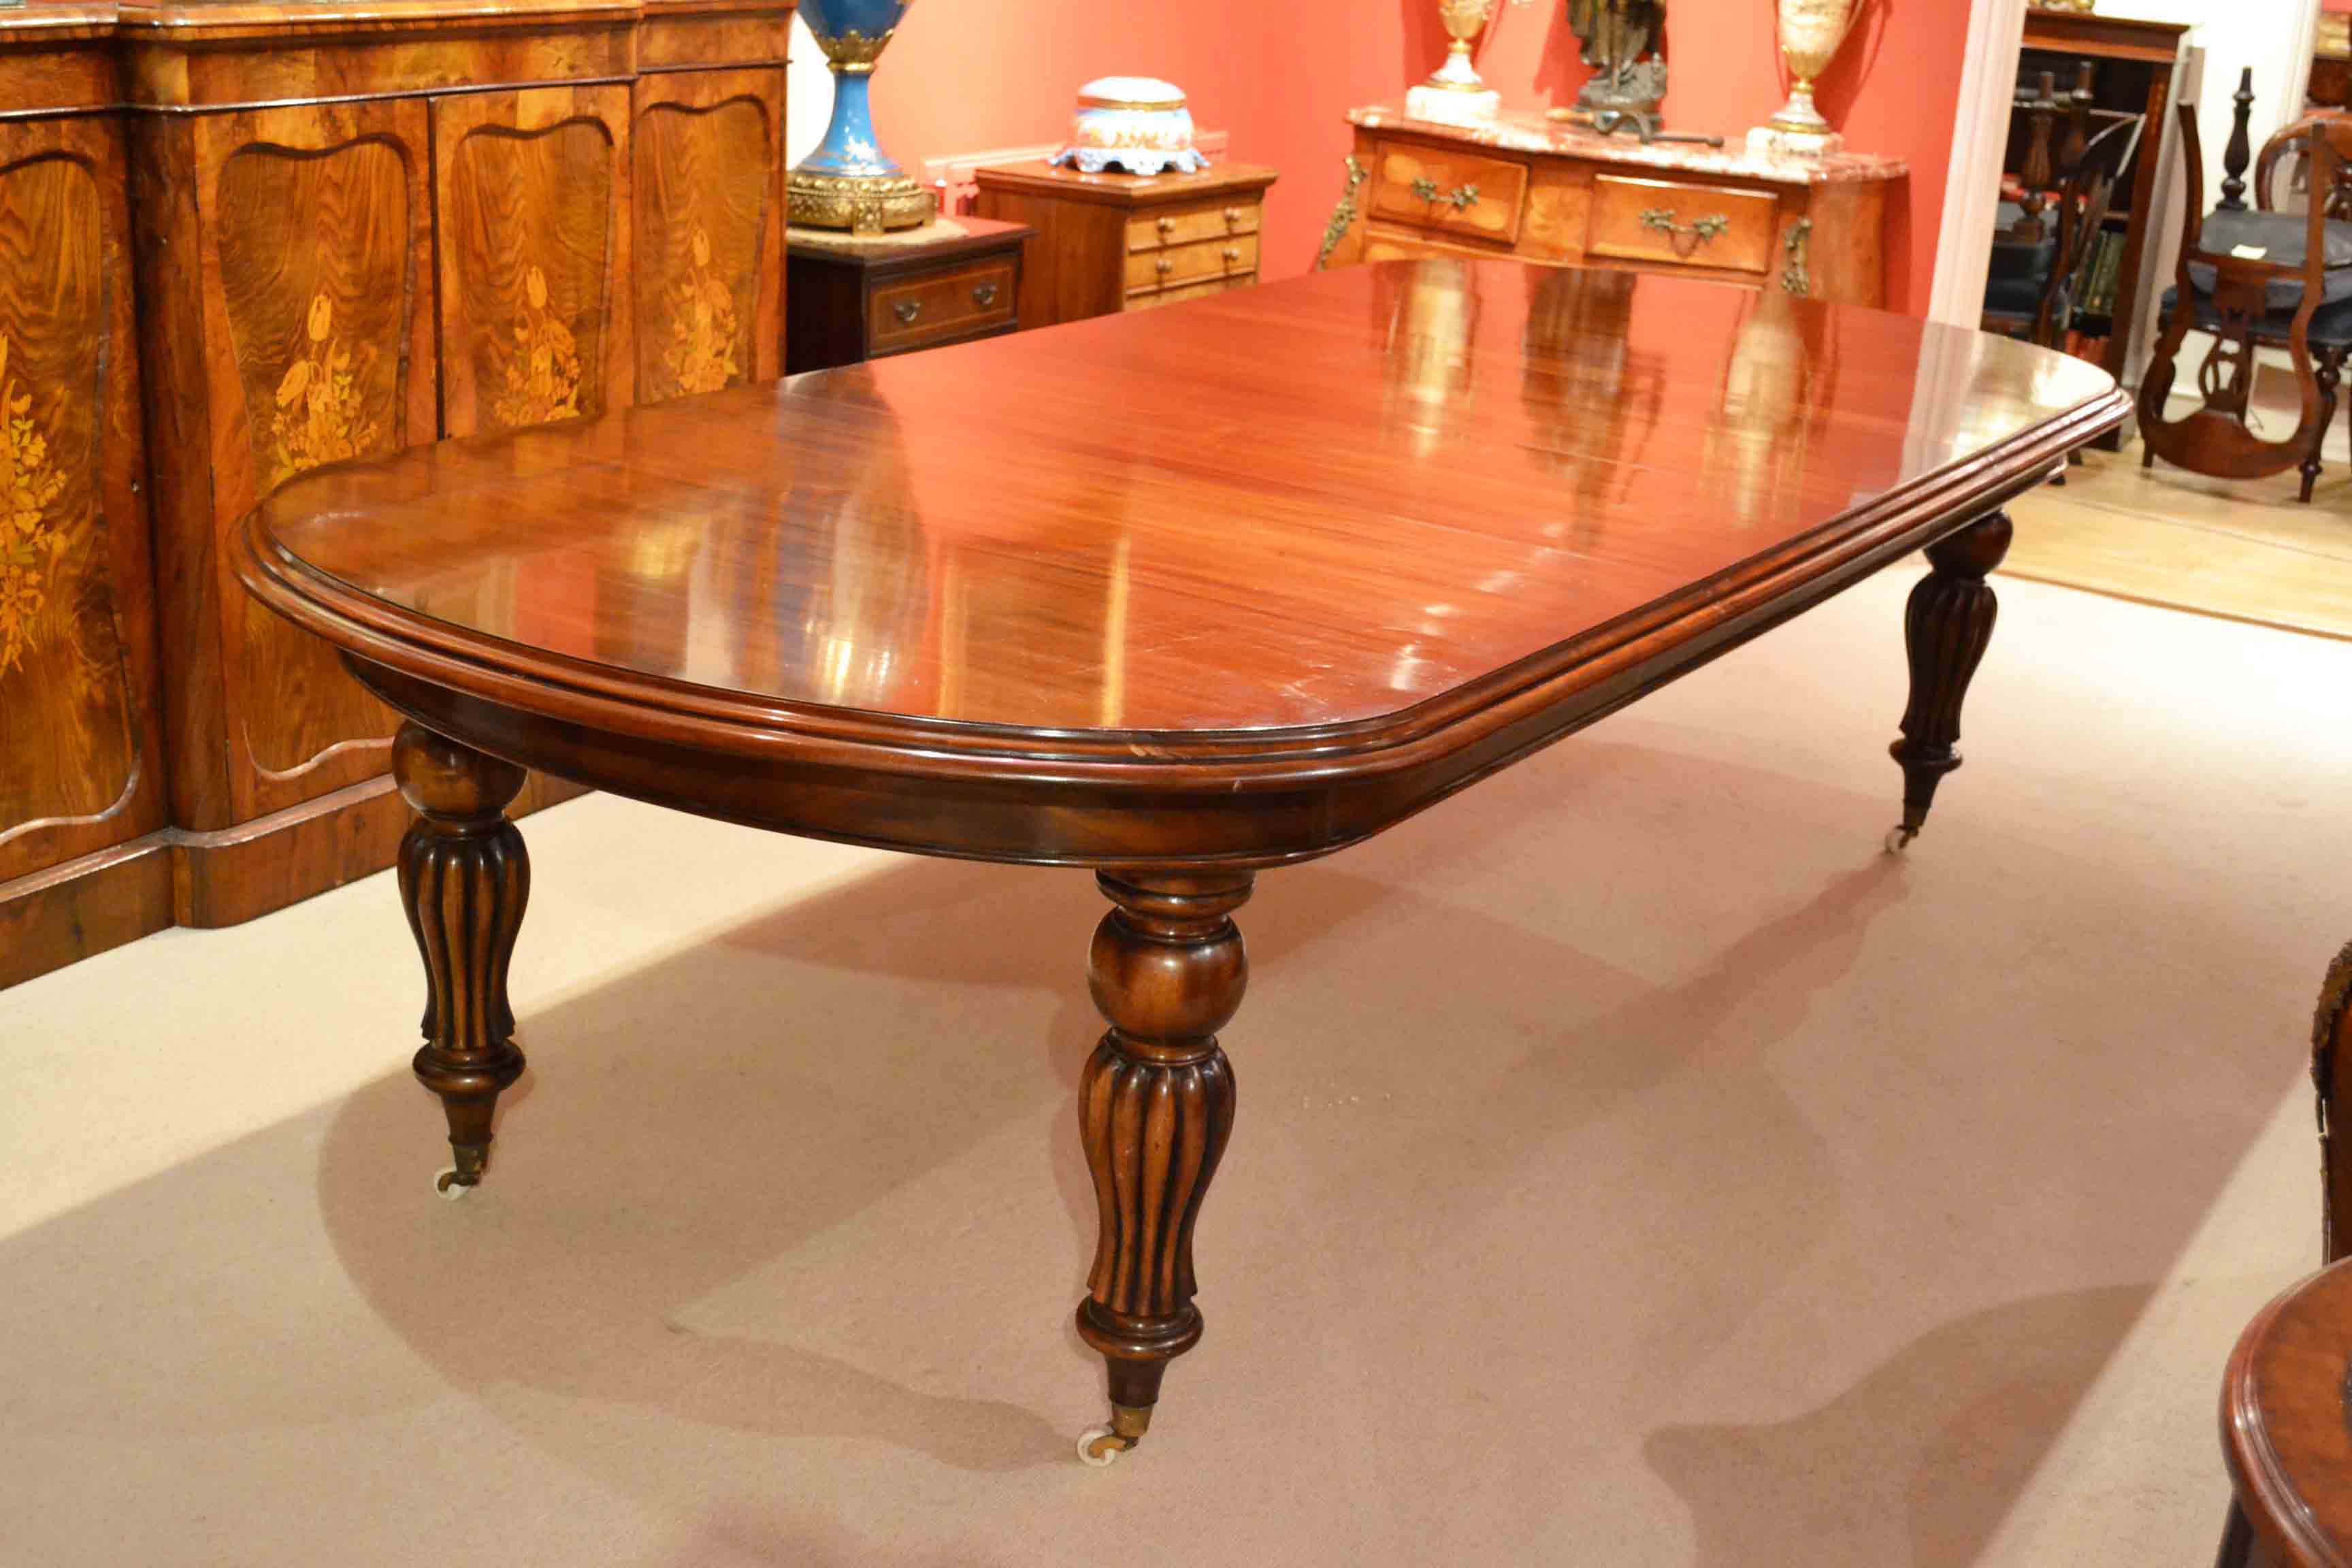 Dining Room Table With 2 Leaves